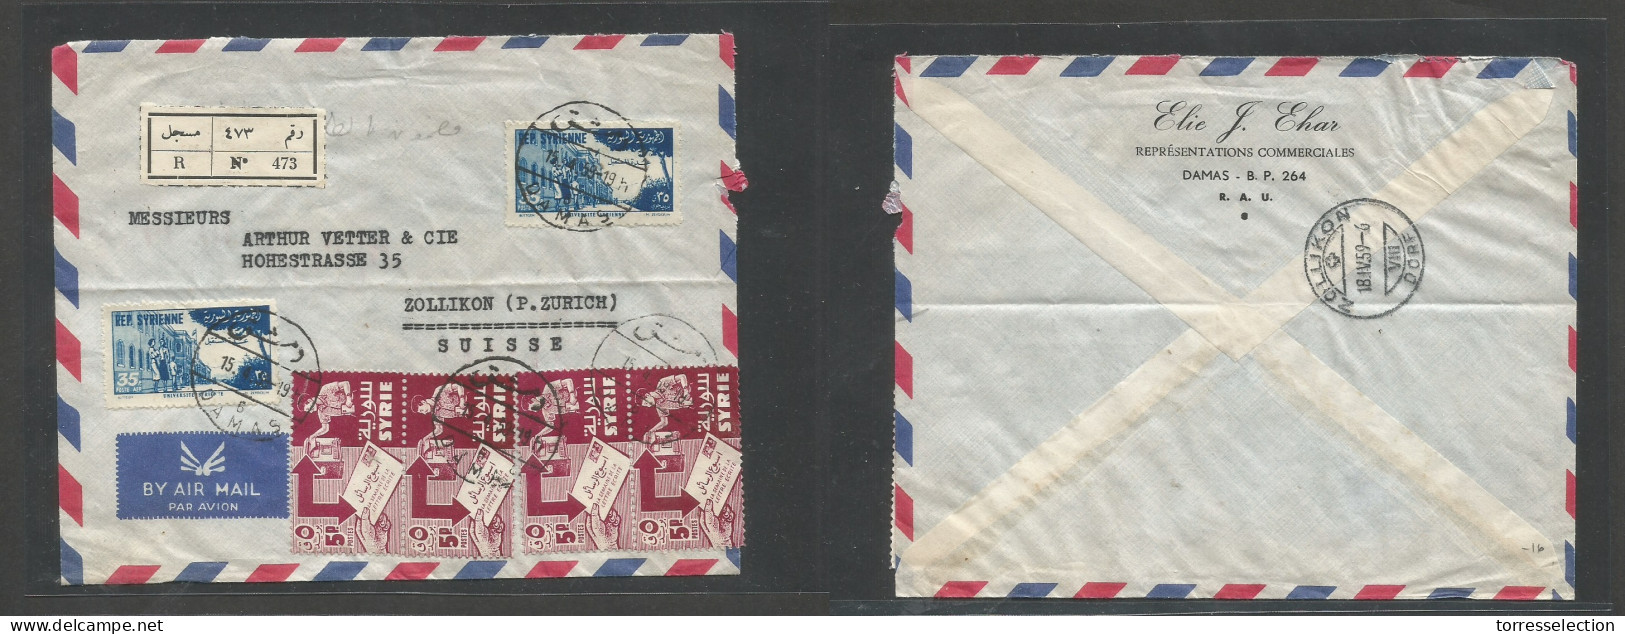 SYRIA. 1959 (15 Apr) Damas - Switzerland, Zellikon (18 April) Registered Air Mixed Issues Multifkd Envelope At 90p Rate, - Syria